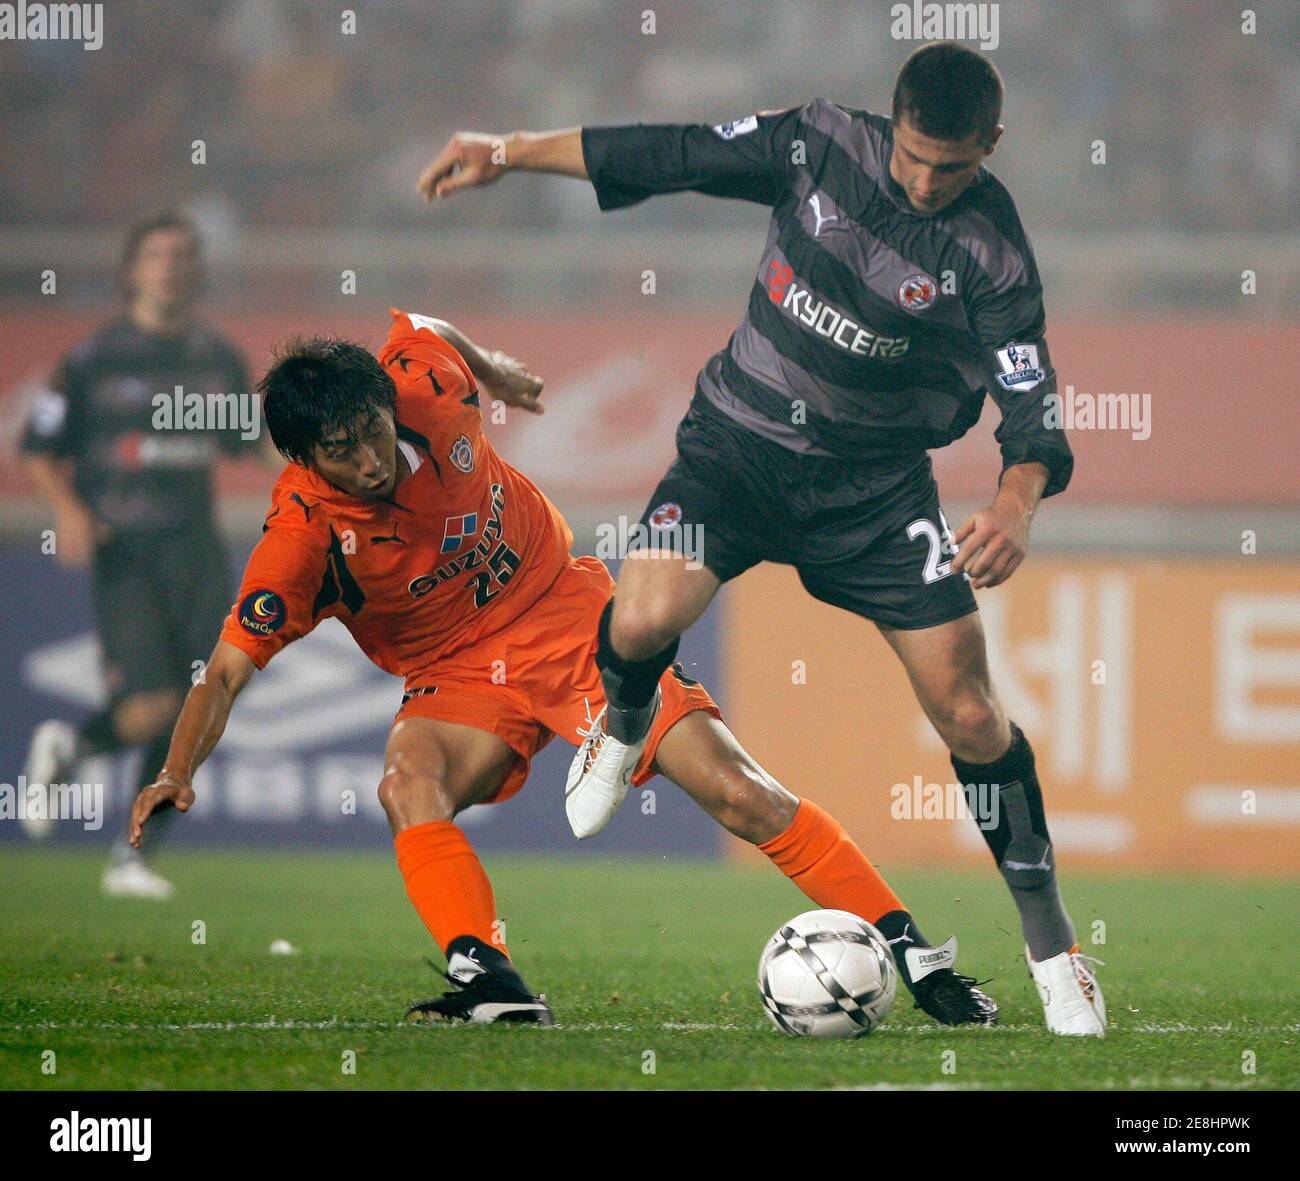 British club Reading FC's Shane Long (R) and Japanese club Shimizu S-Pulse's Daisuke Ichikawa fight for the ball at the 2007 Peace Cup Korea tournament in Goyang, north of Seoul, July 19, 2007.  REUTERS/Jo Yong-Hak (SOUTH KOREA) Stock Photo